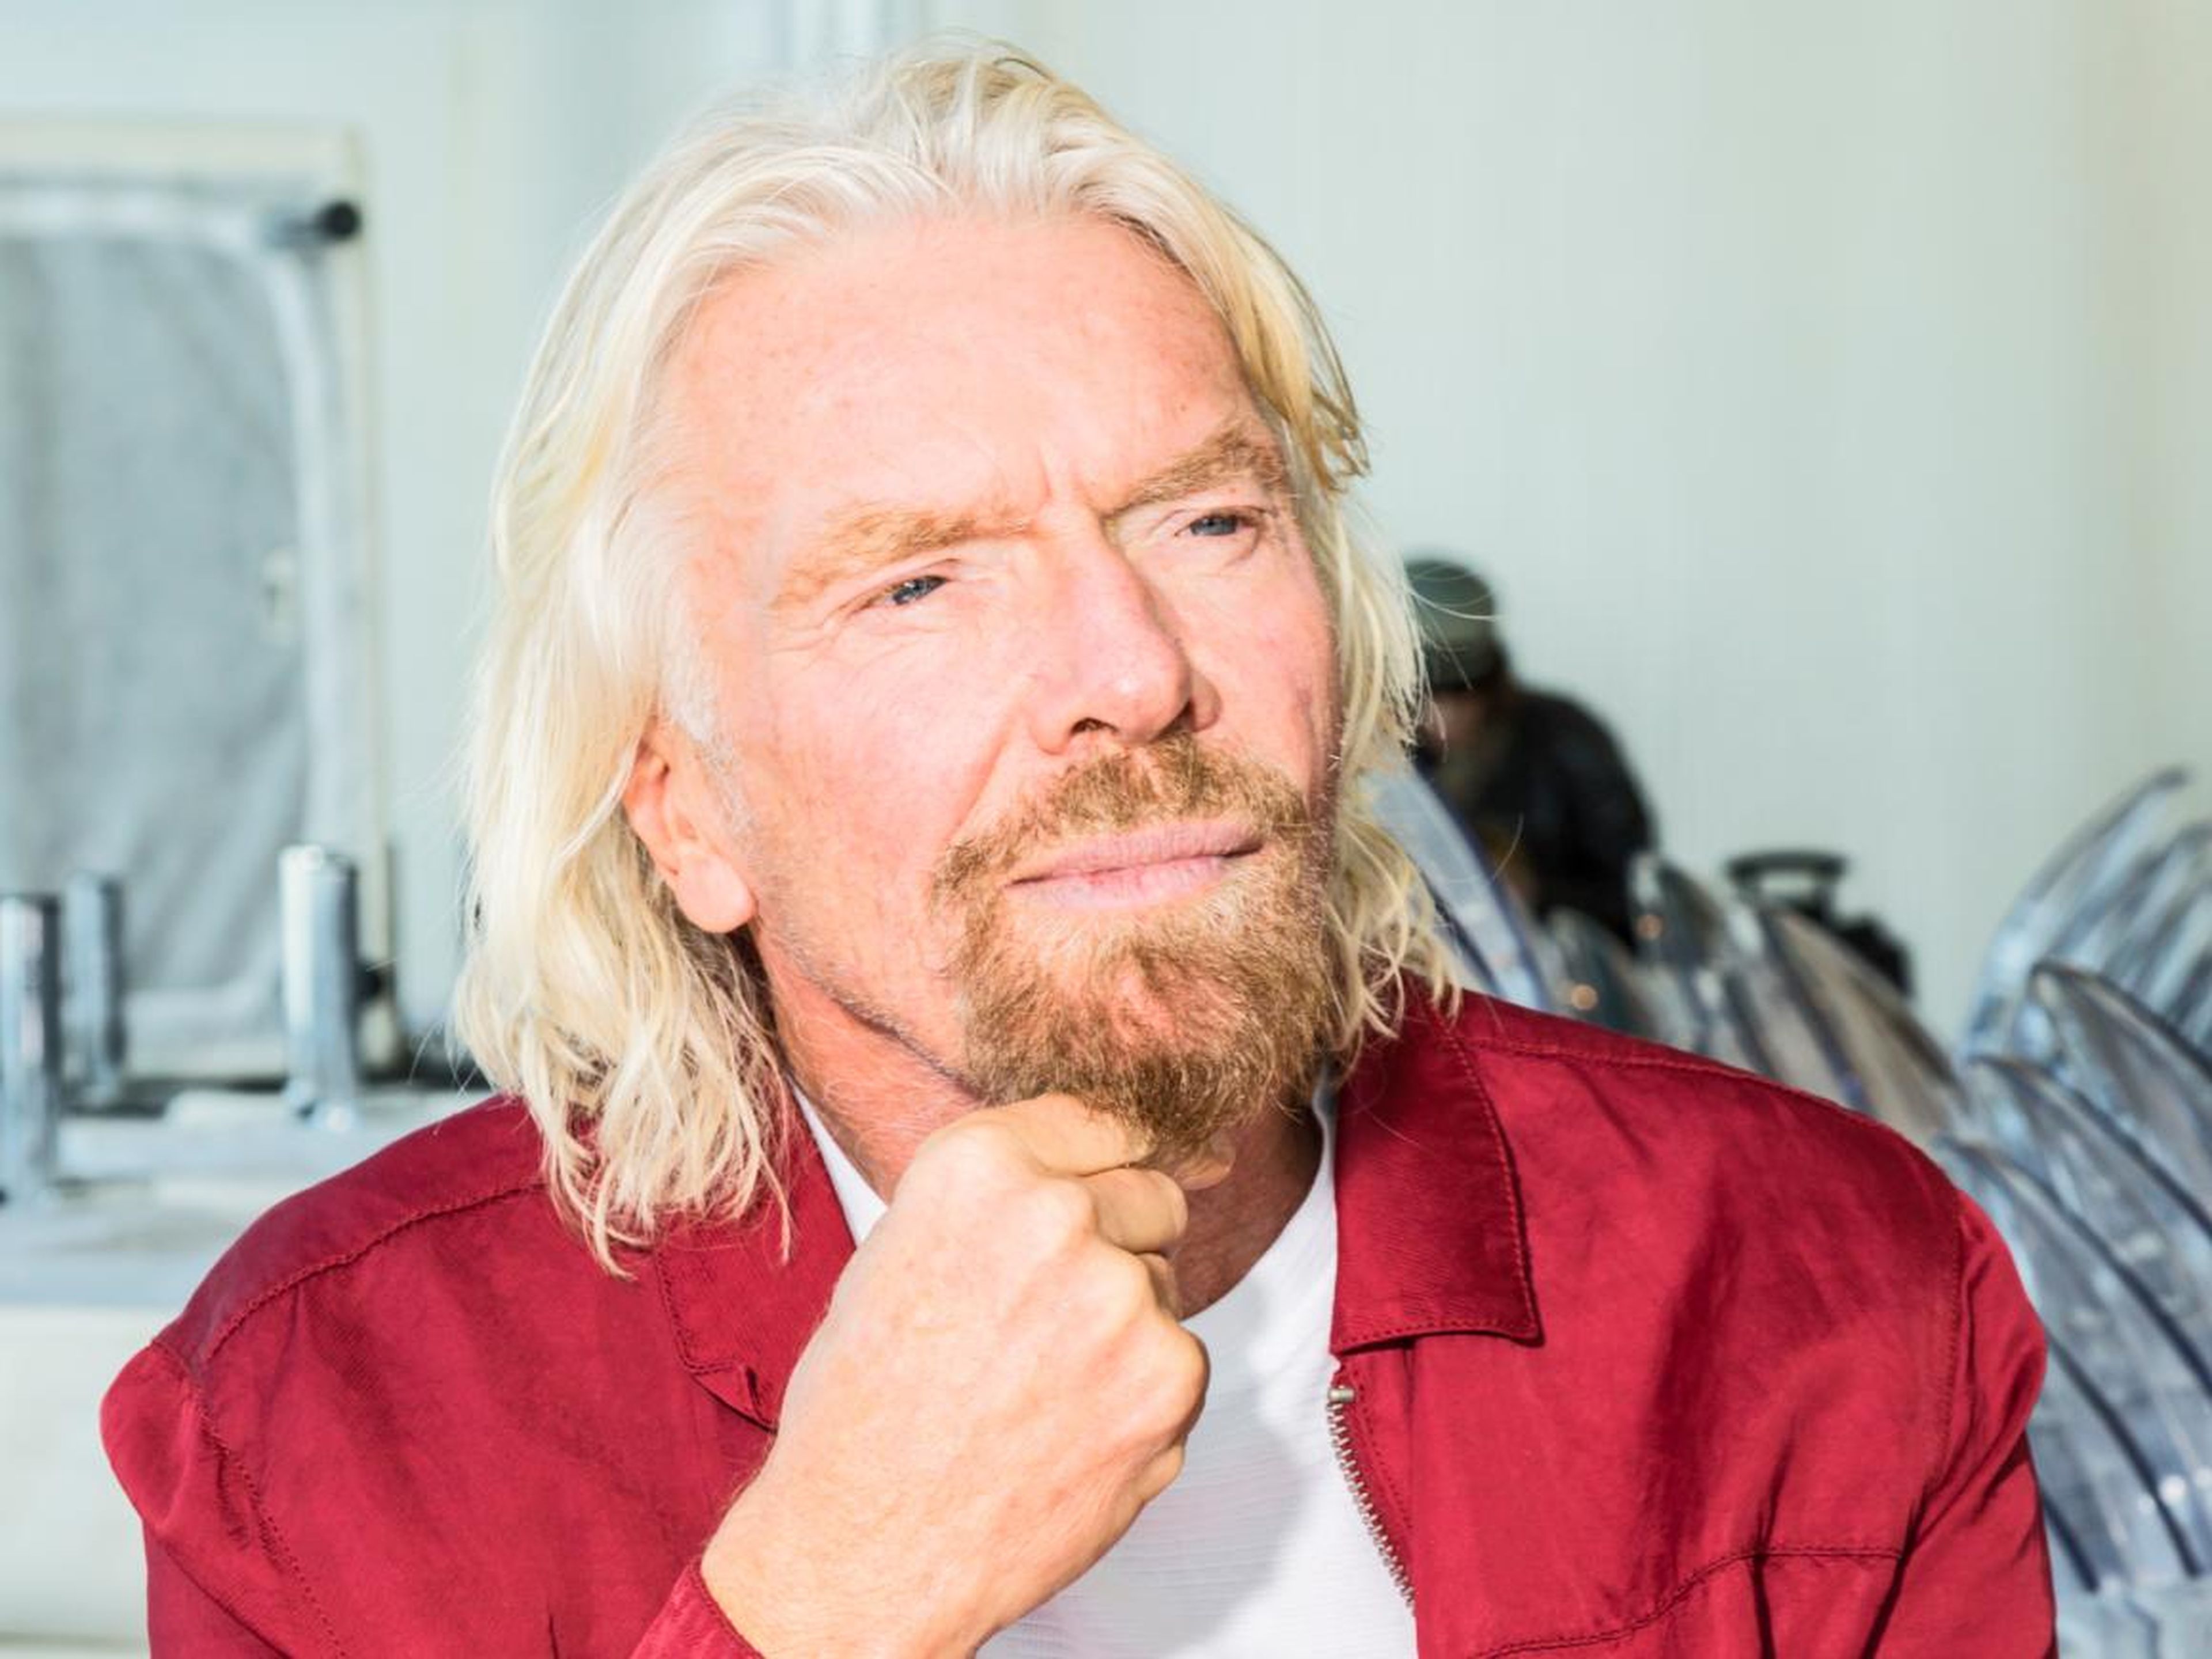 Richard Branson, the founder of Virgin Group, estimates he drinks 20 cups of tea a day. "I'm not sure how I'd survive without English Breakfast tea," Branson told the Daily Mail in 2016.